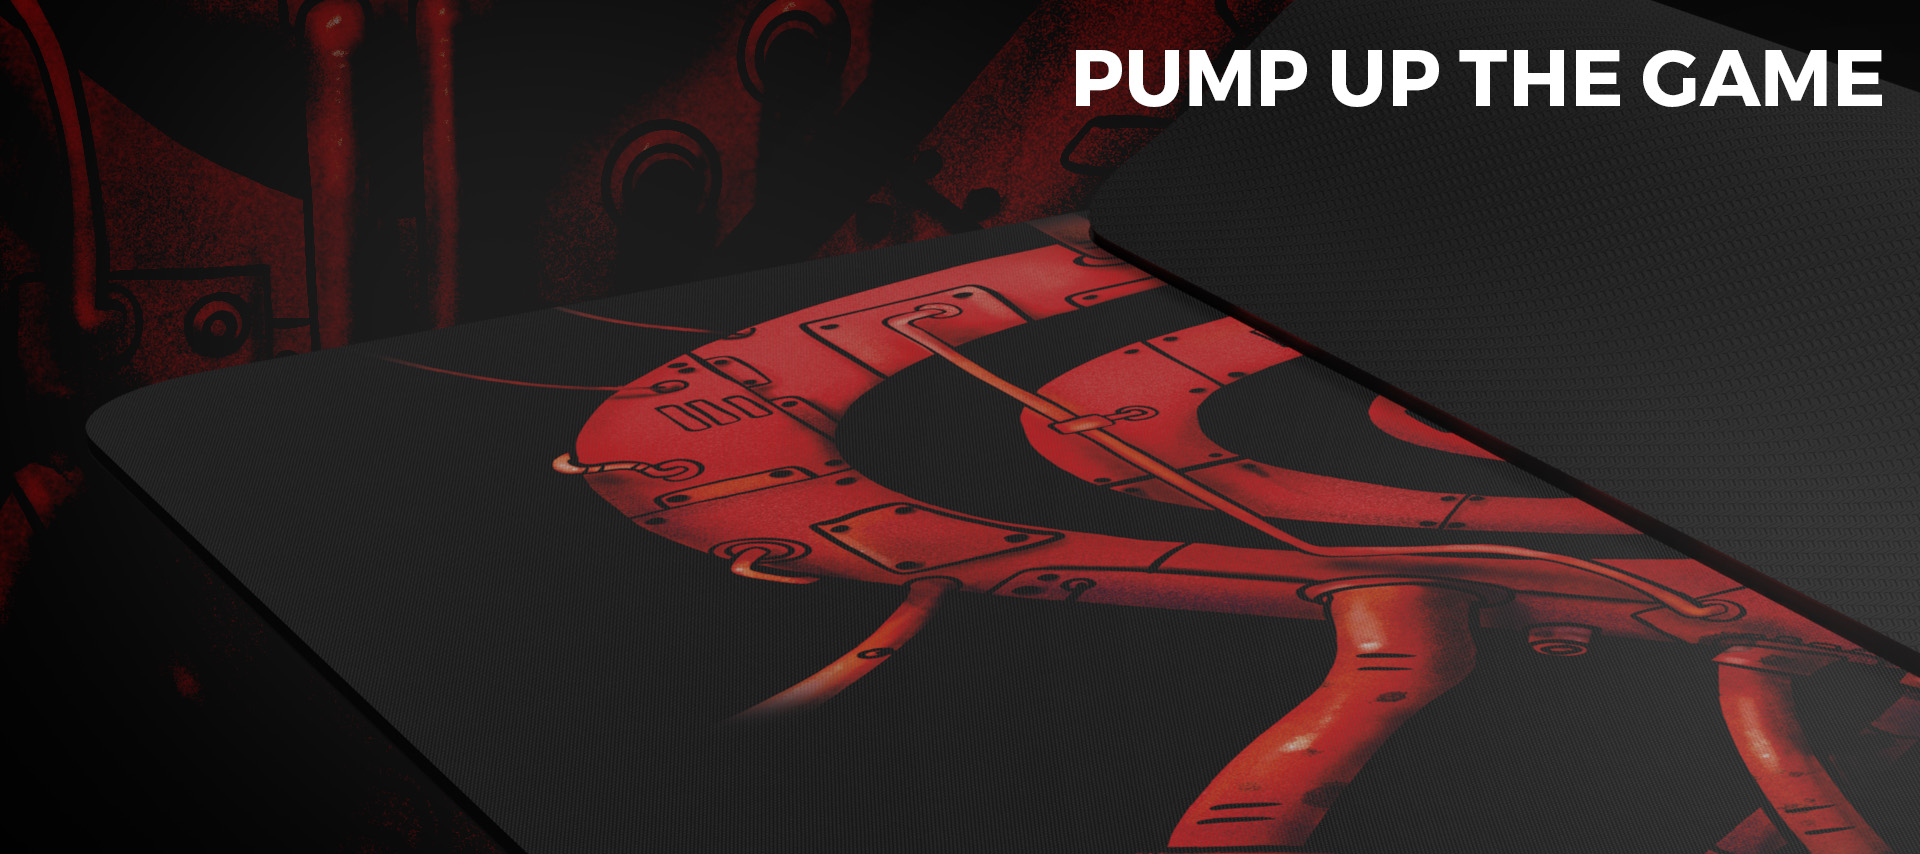 mouse pad genesis promo - pump up the game 250x210 mm 8